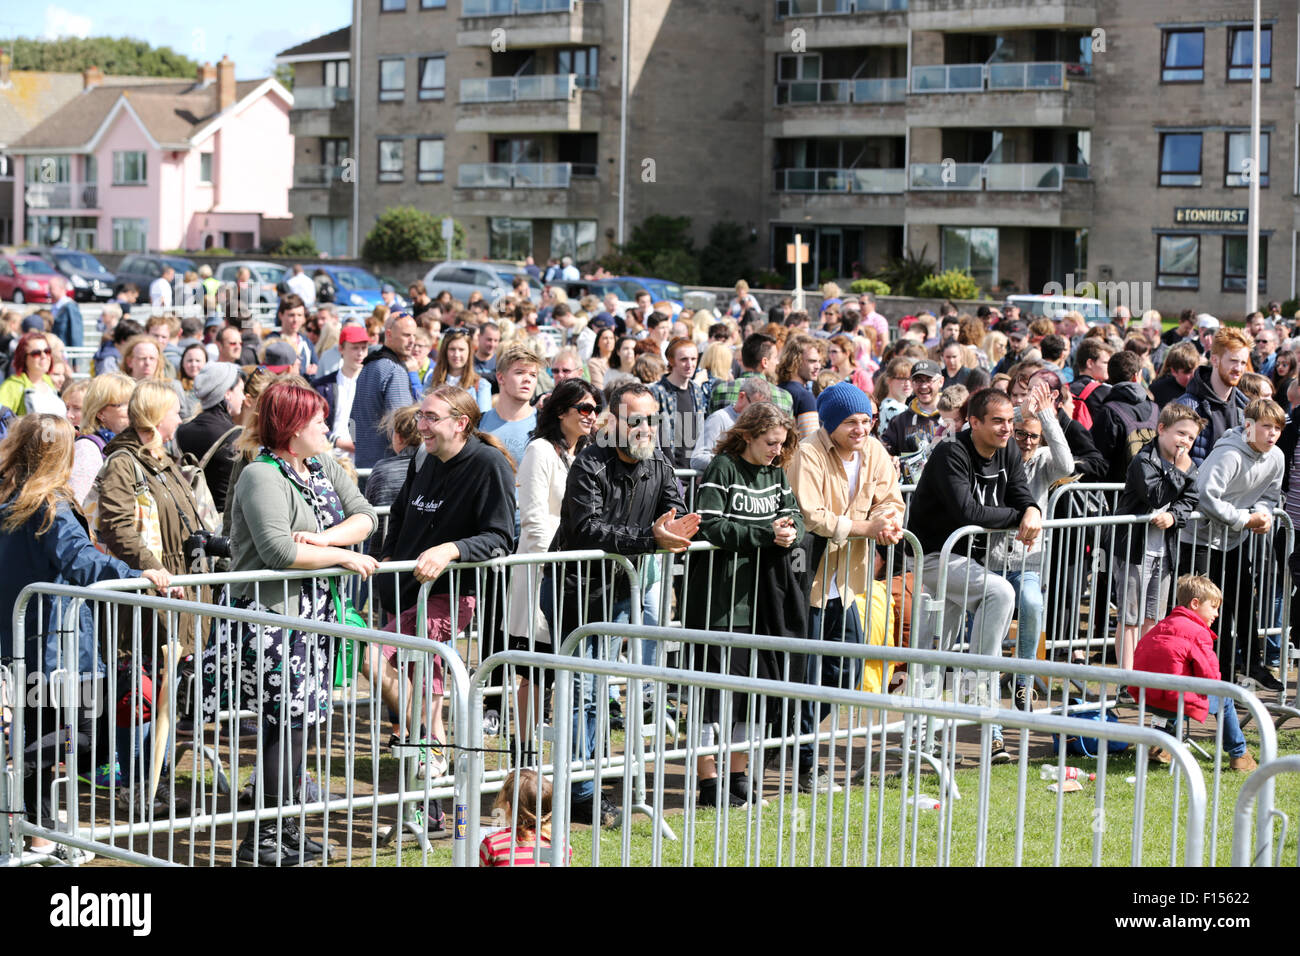 Weston-s-Mare, UK. 27th August 2015. Early morning sunshine encourages a large turnout hoping to get entry to Banksy's Dismaland Fun Park. The crowd cheer having just been told 100 tickets have just become available. Credit:  Stephen Hyde/Alamy Live News Stock Photo